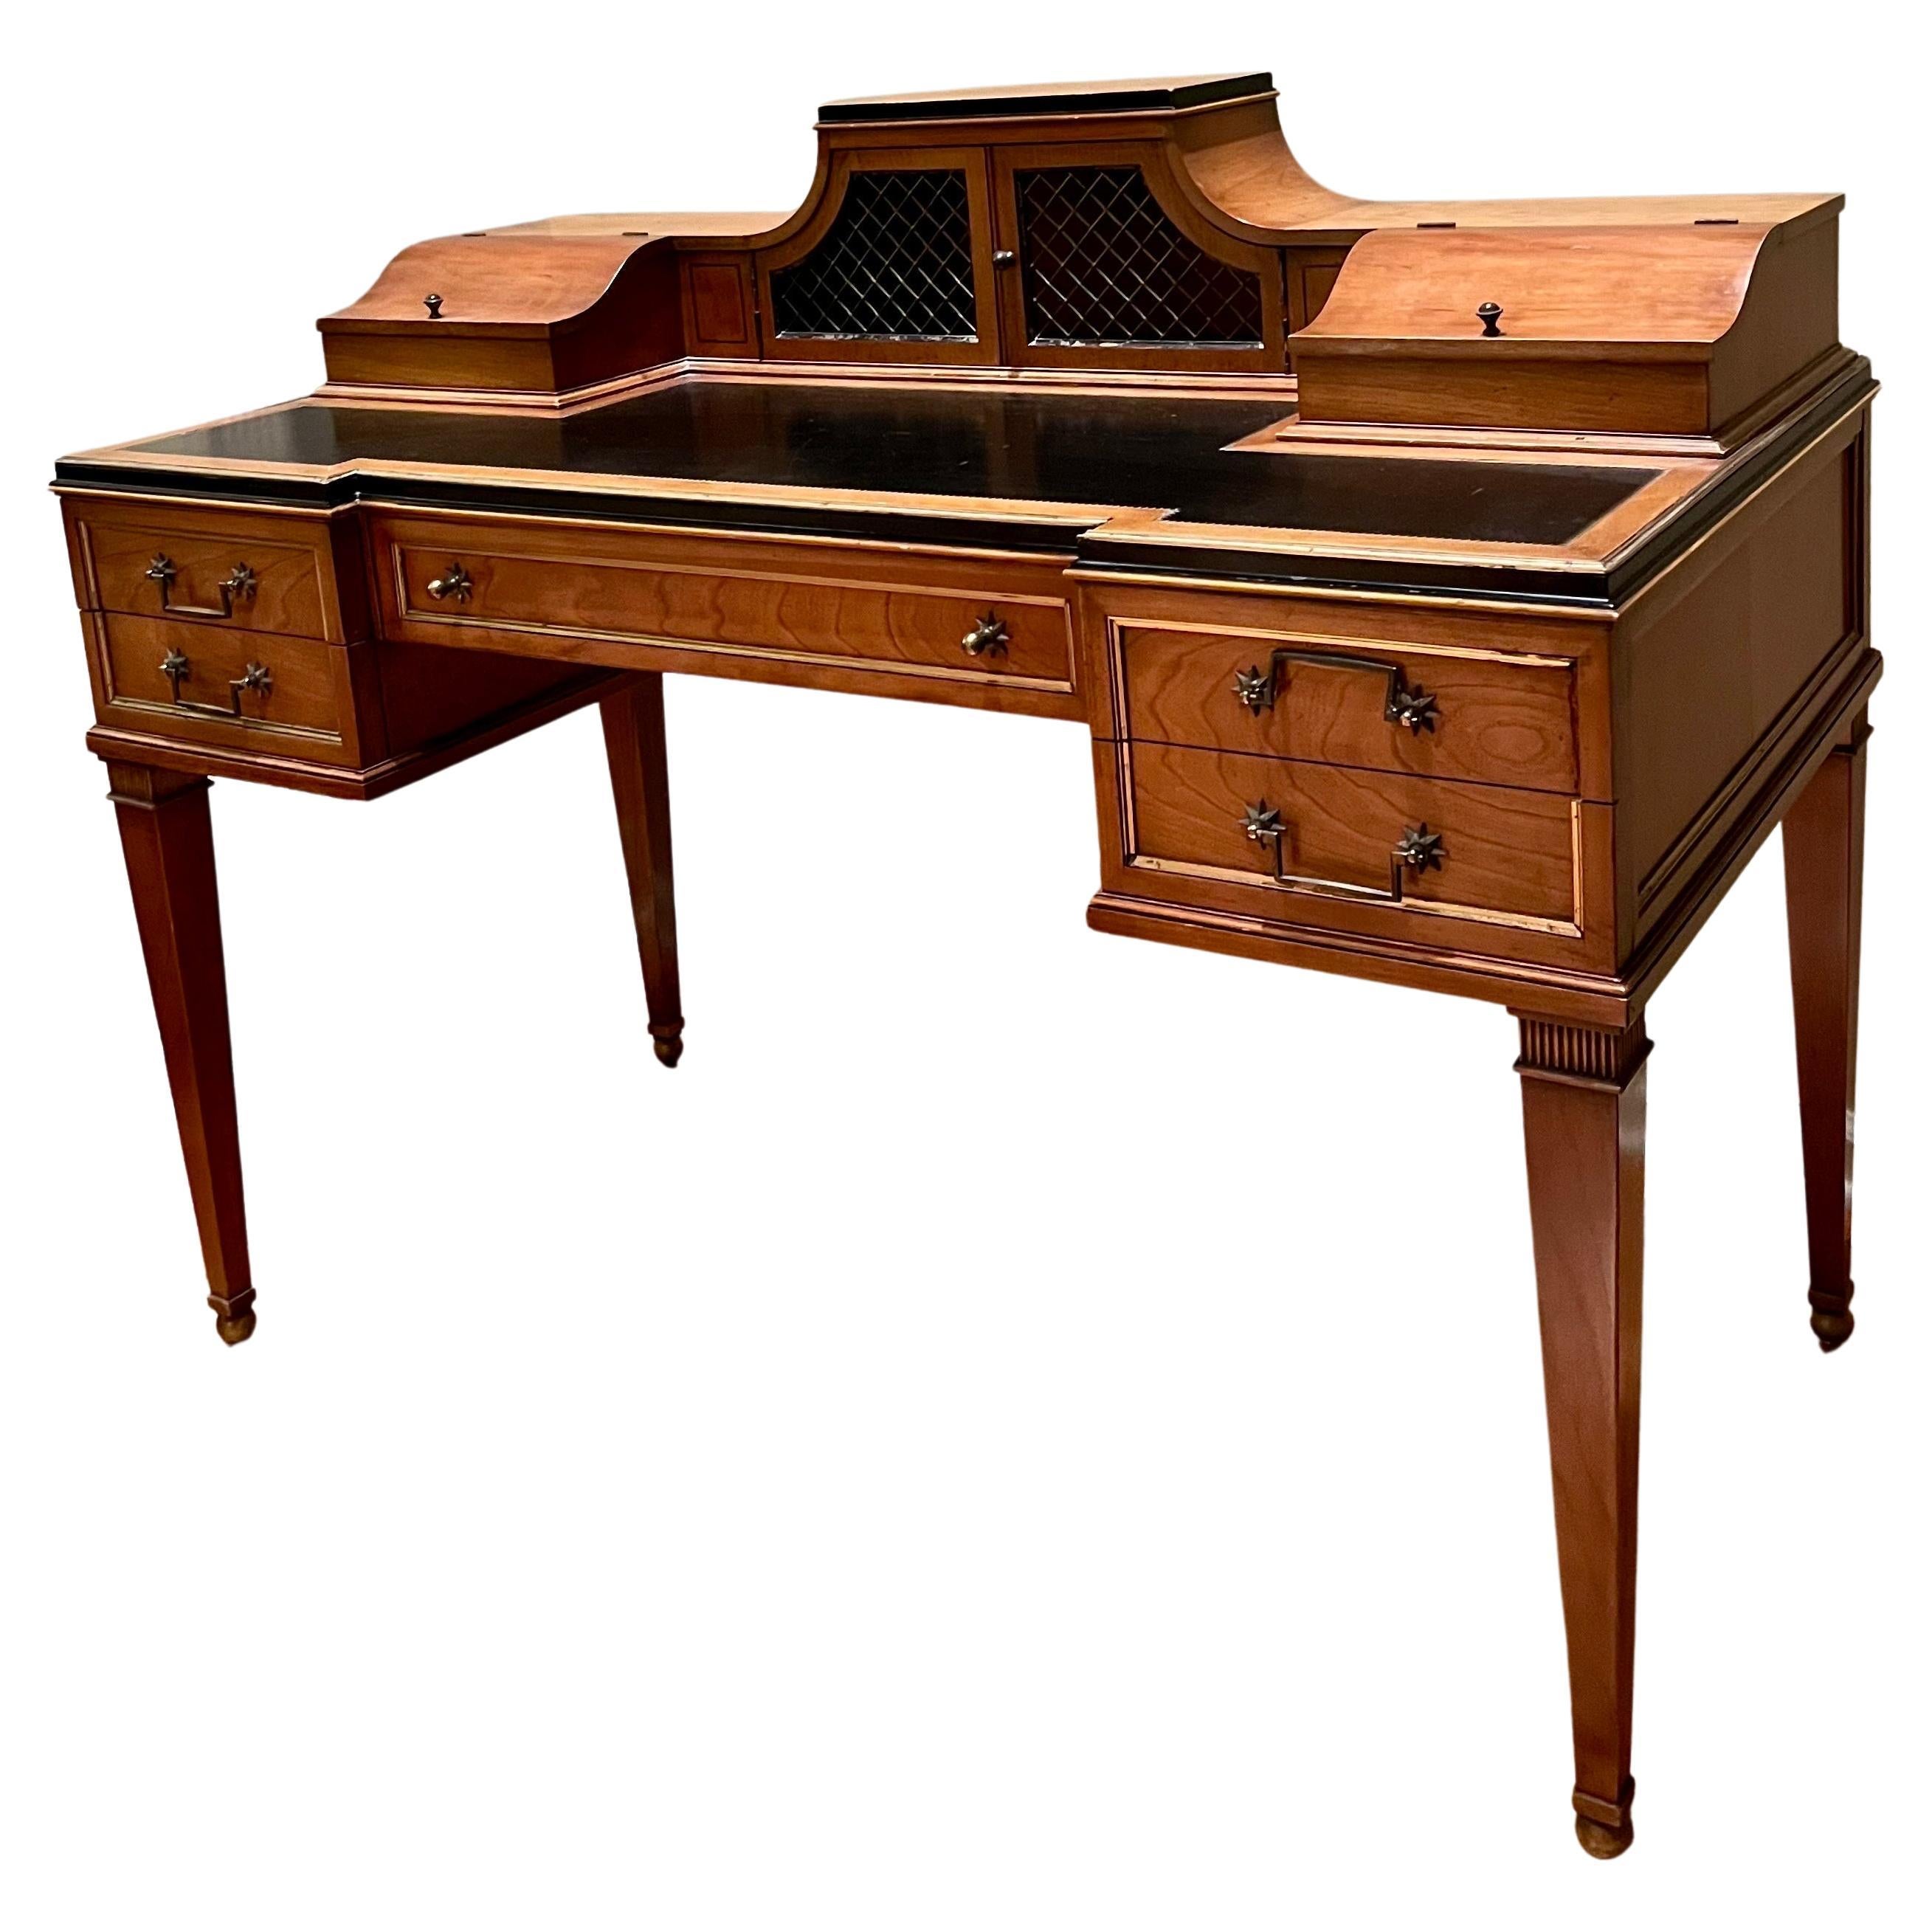 Carlton House Writing Desk. Stands on four hepplewhite legs with ball feet. Accented with tooled leather top, starburst brass drawer pull, brass trim on all sides and drawers. Metal fretwork cabinet doors. Features multiple drawers, compartments and